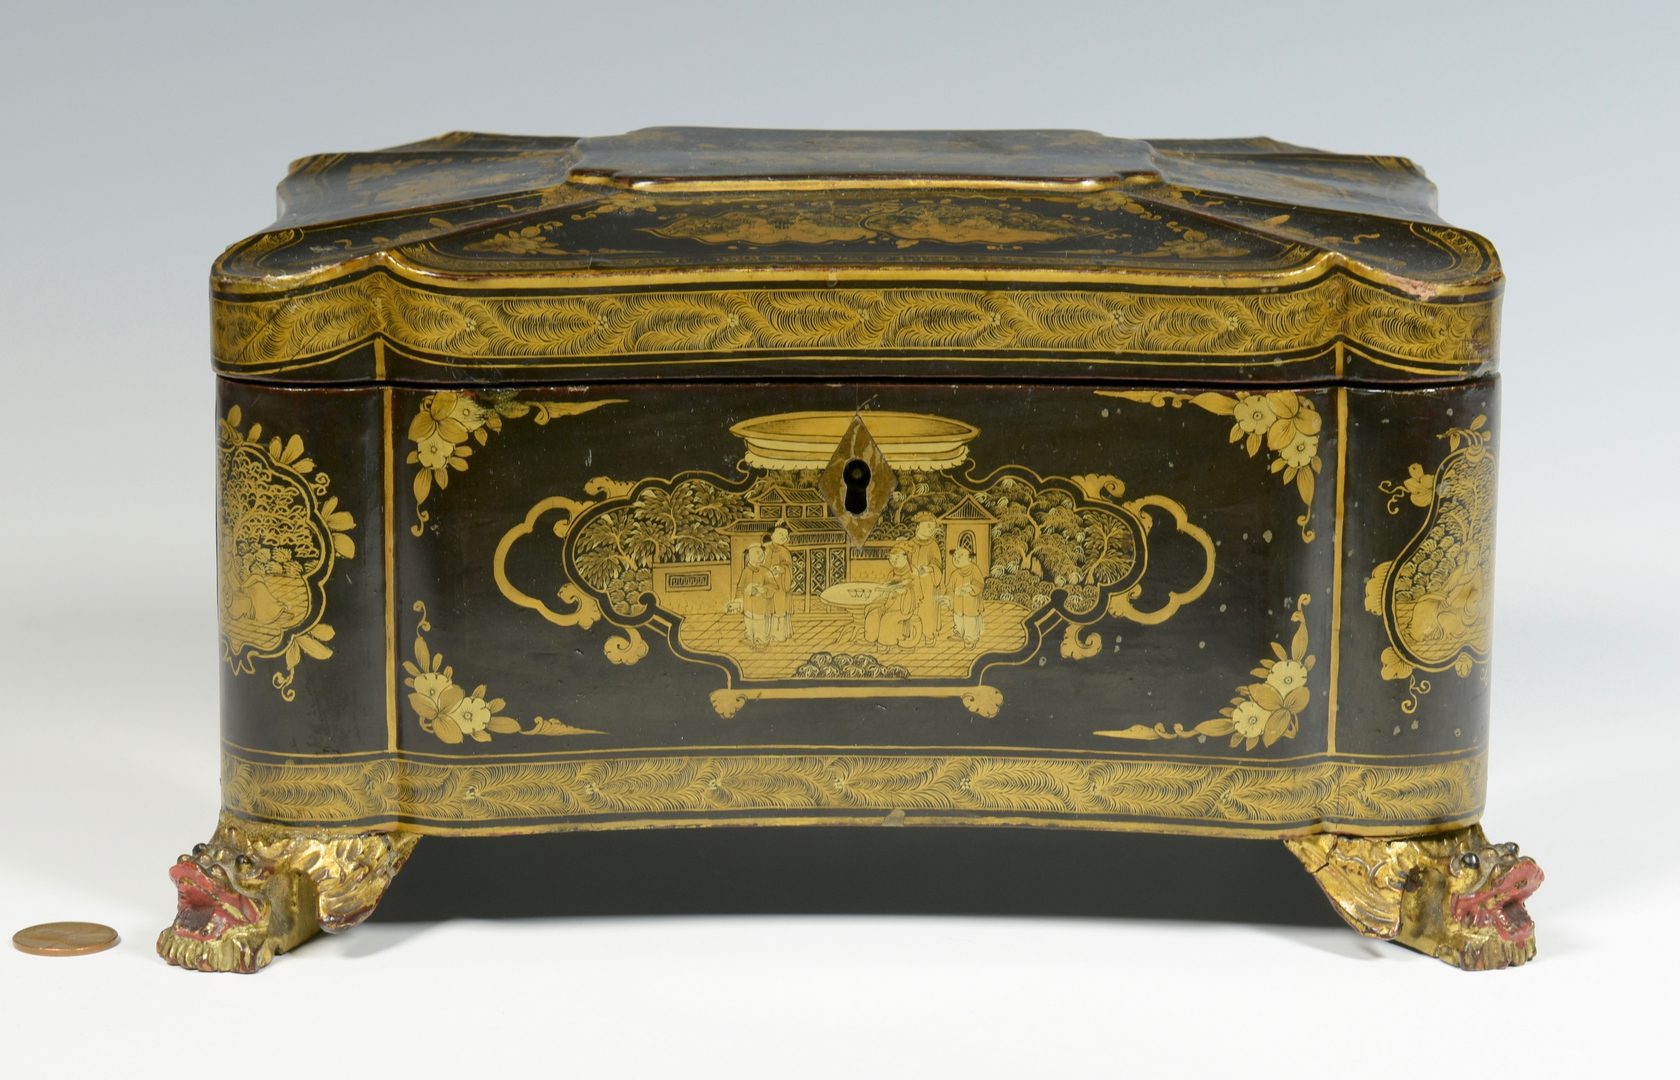 Lot 632: Asian Chinoiserie Lacquer Box